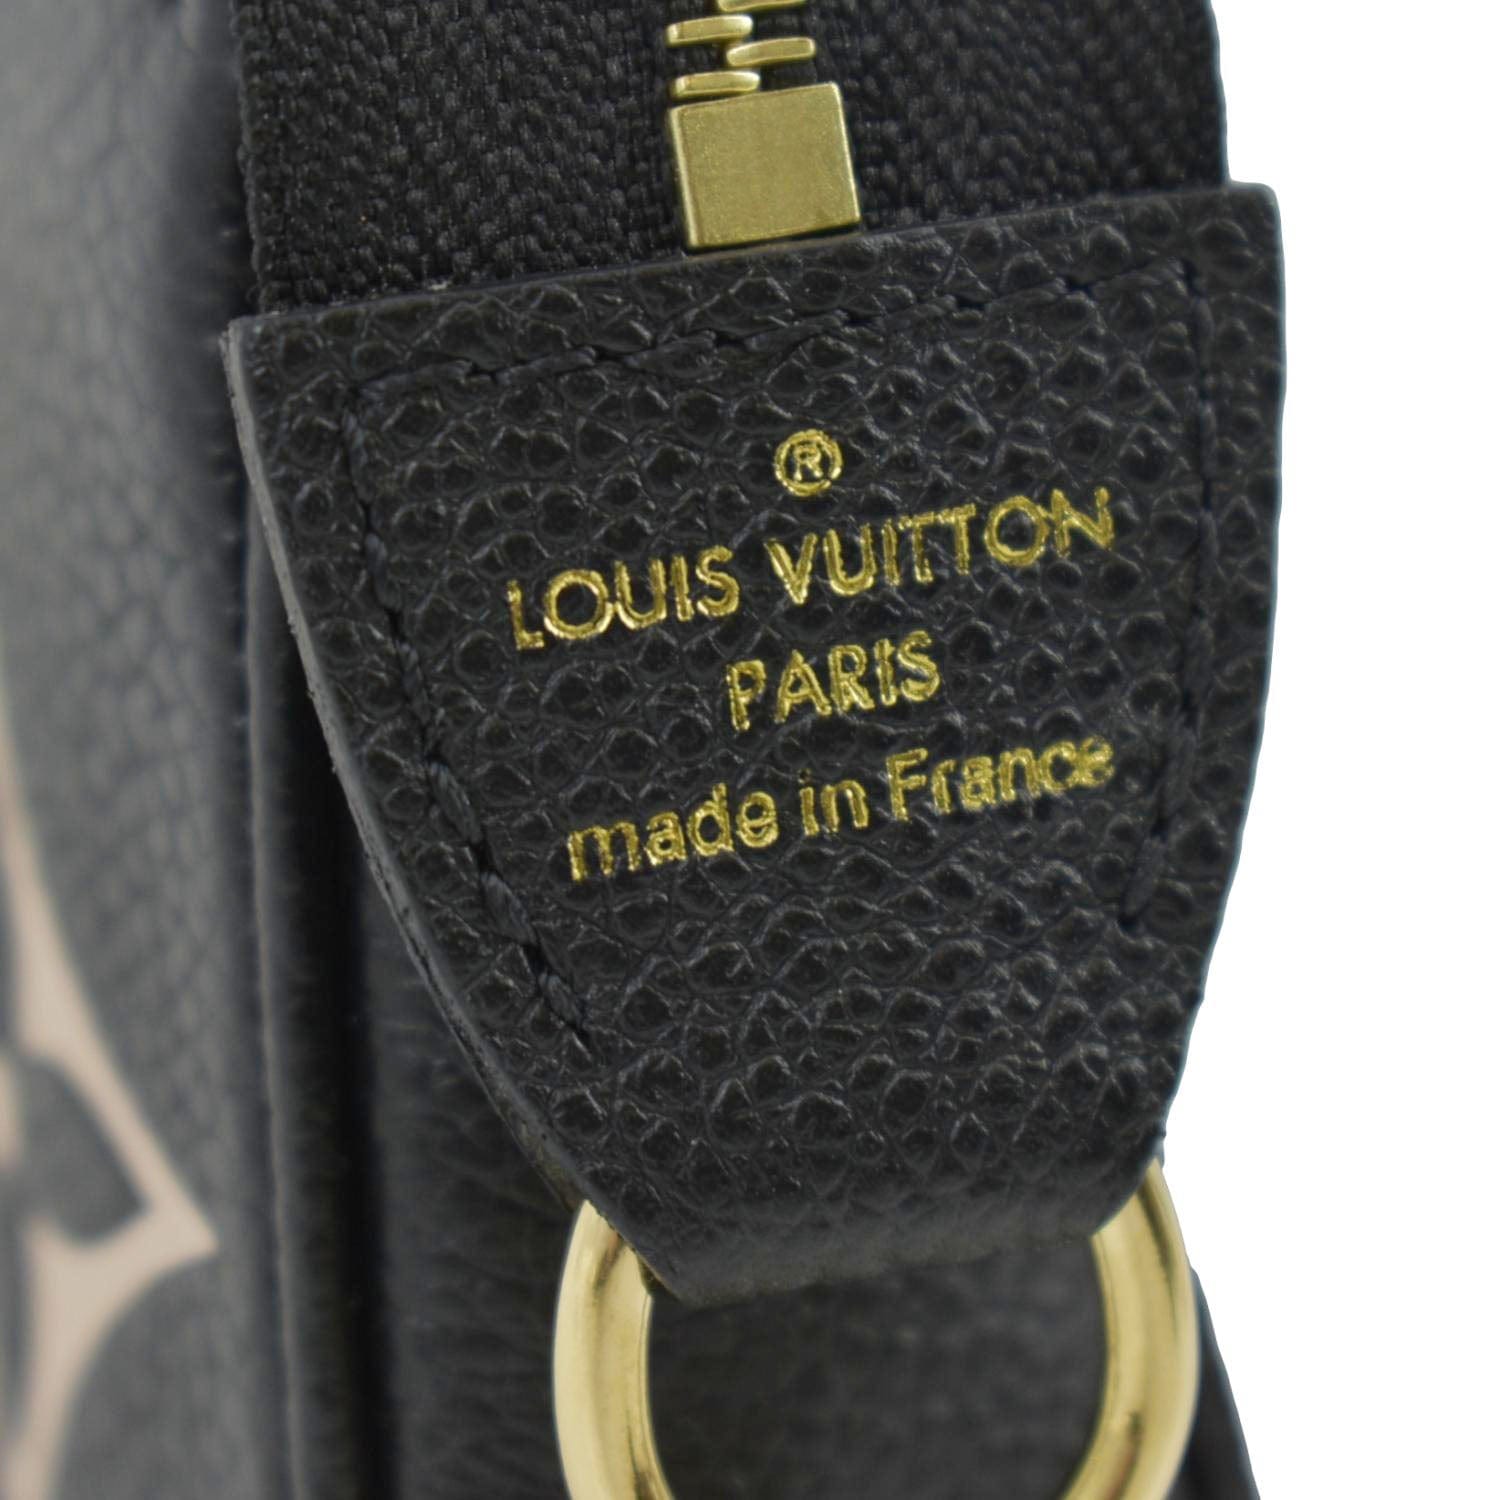 Anything for fashion: The miniature Louis Vuitton bag, created by